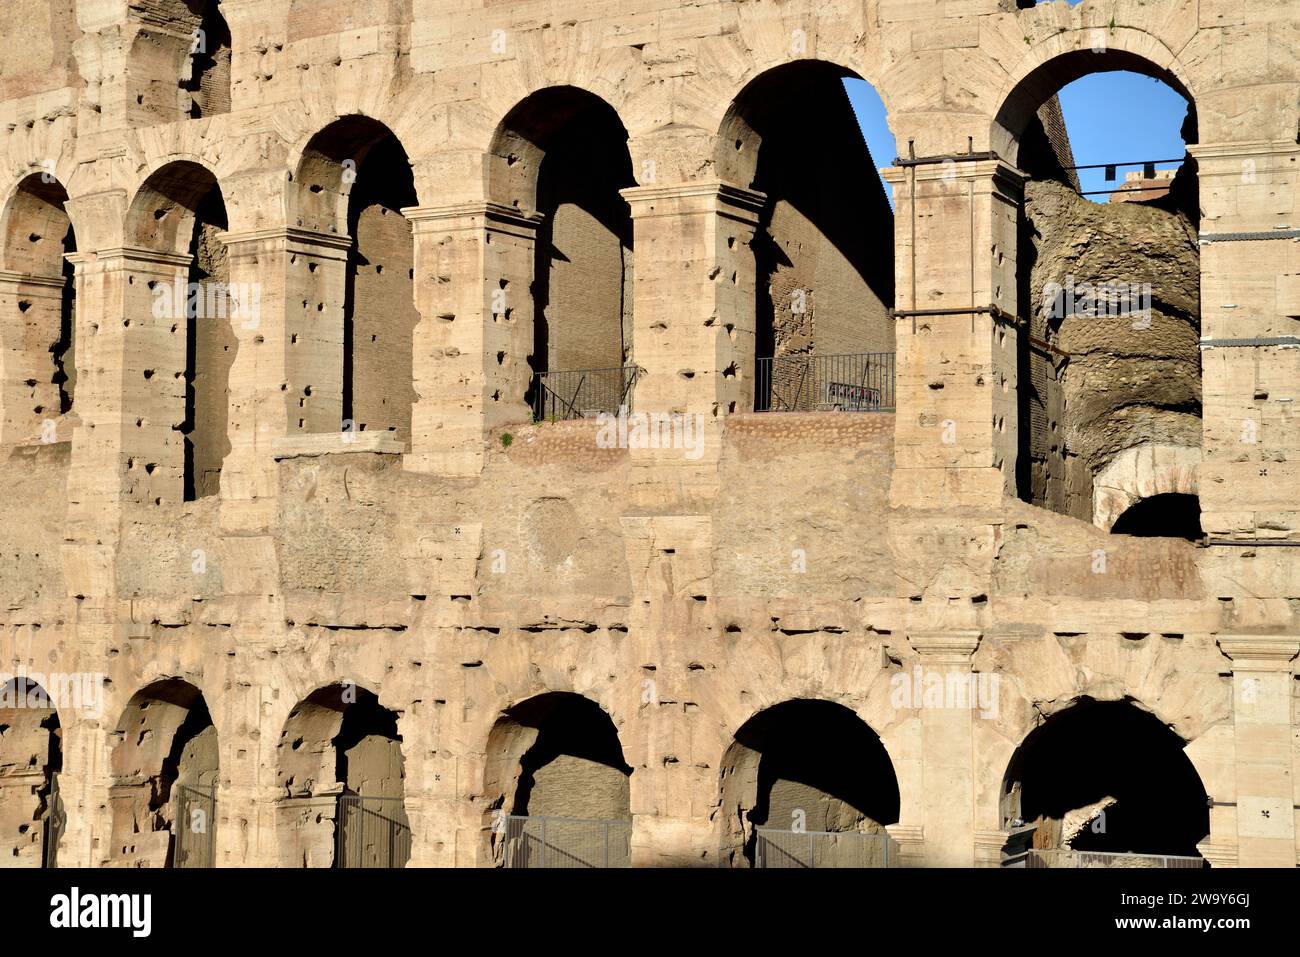 Rome Italy, Colosseum detail Stock Photo